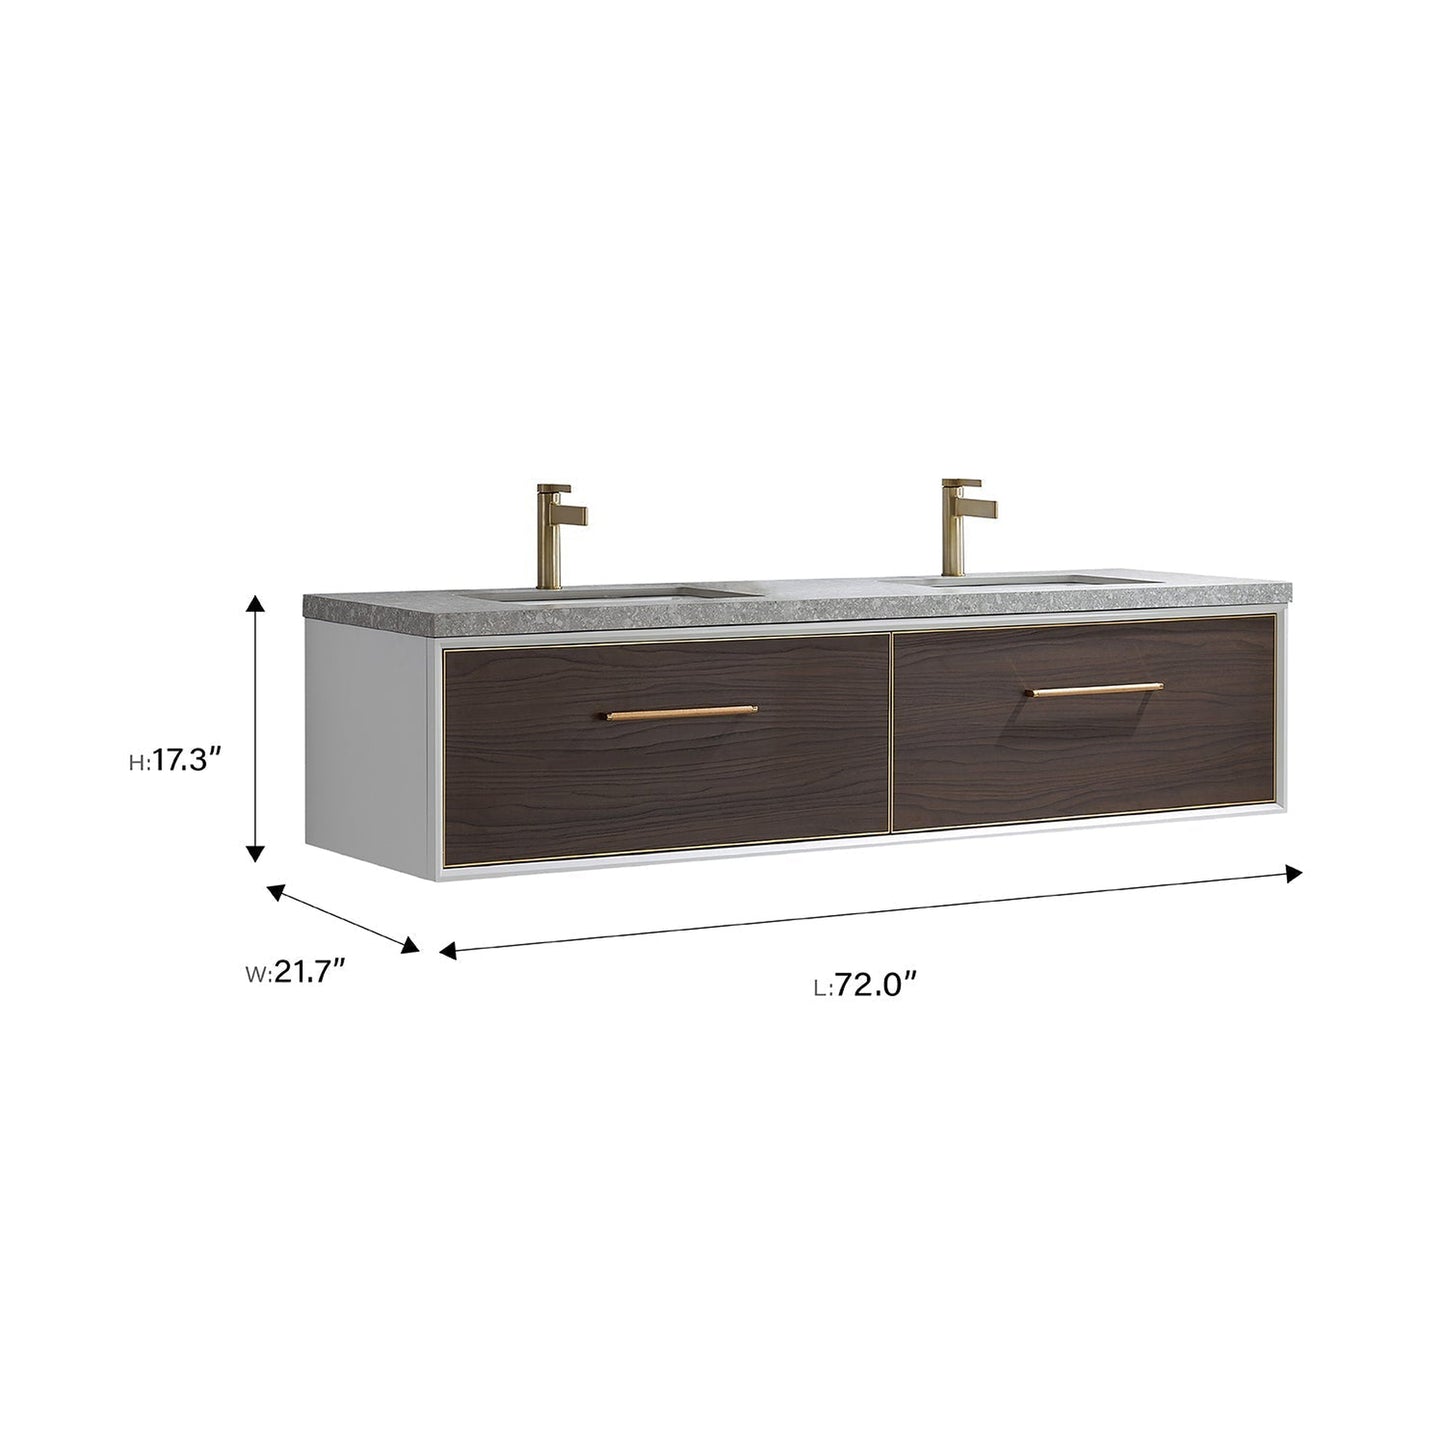 Vinnova Caparroso 72" Double Sink Floating Bathroom Vanity In Dark Walnut And Brushed Gold Hardware Finish With Grey Sintered Stone Top And Mirror